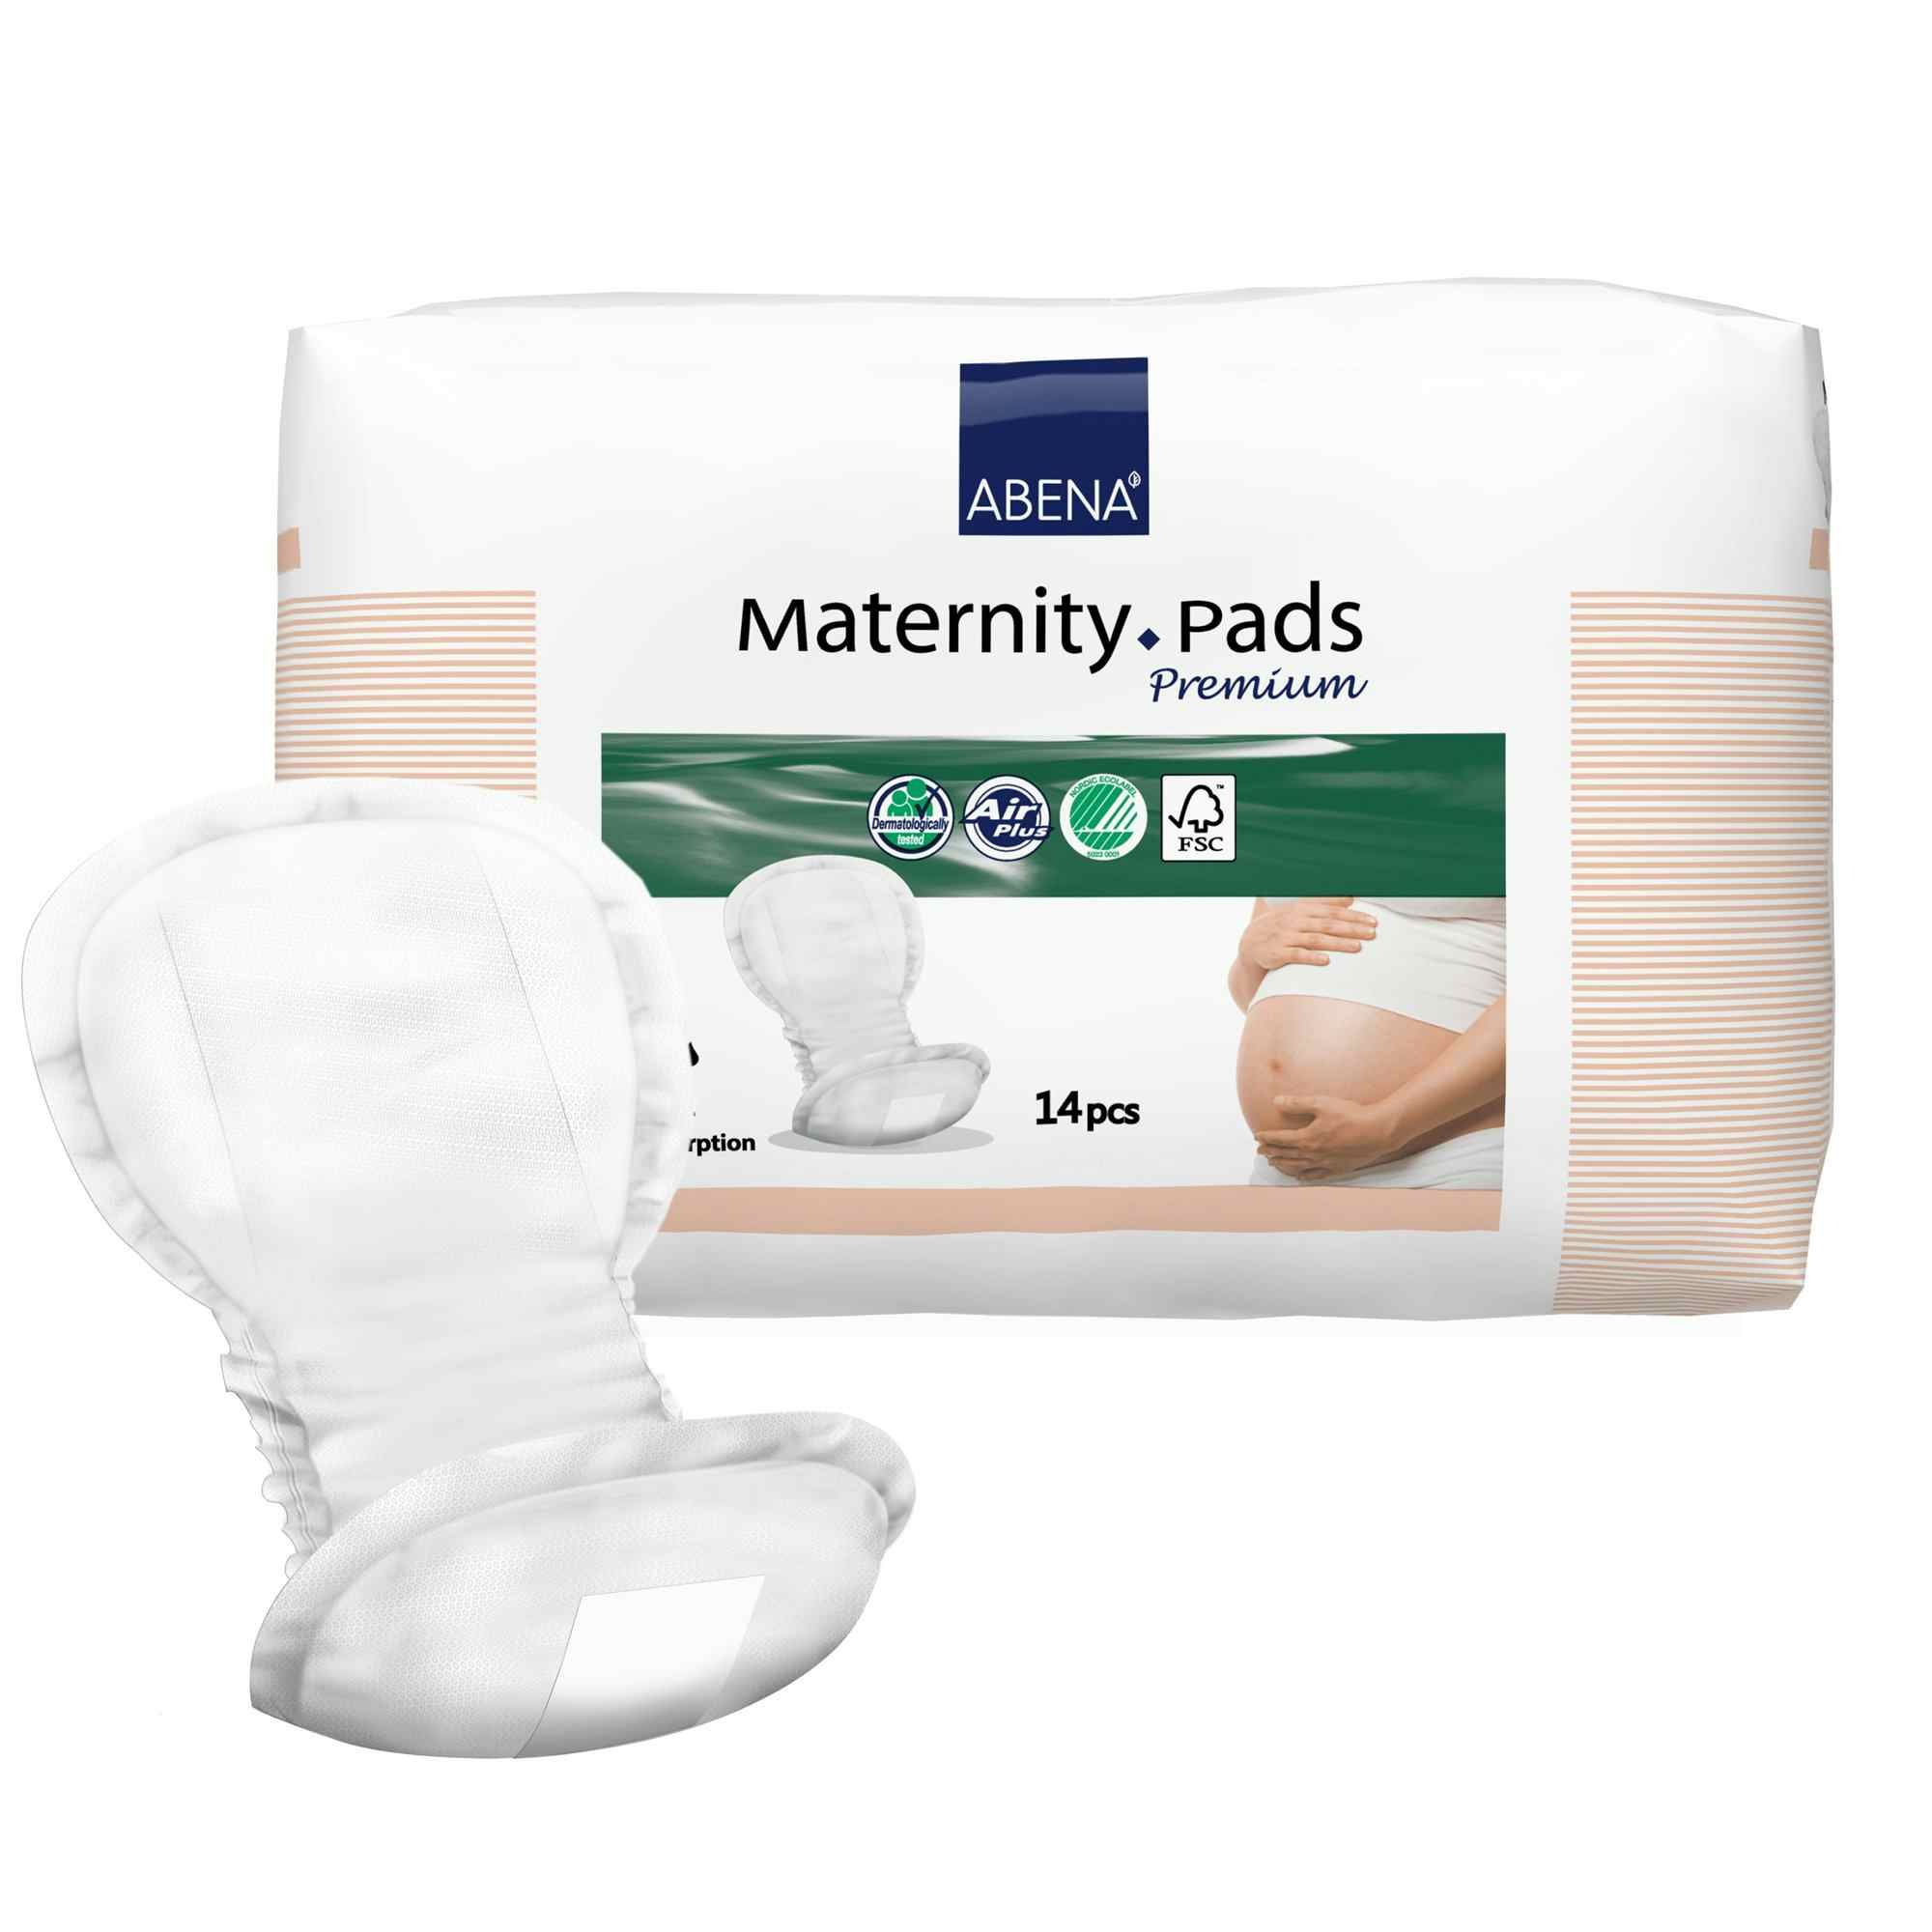 Abena Maternity Pads Premium Moderate Absorbency, 1000016571, Case of 168 (14 Bags)